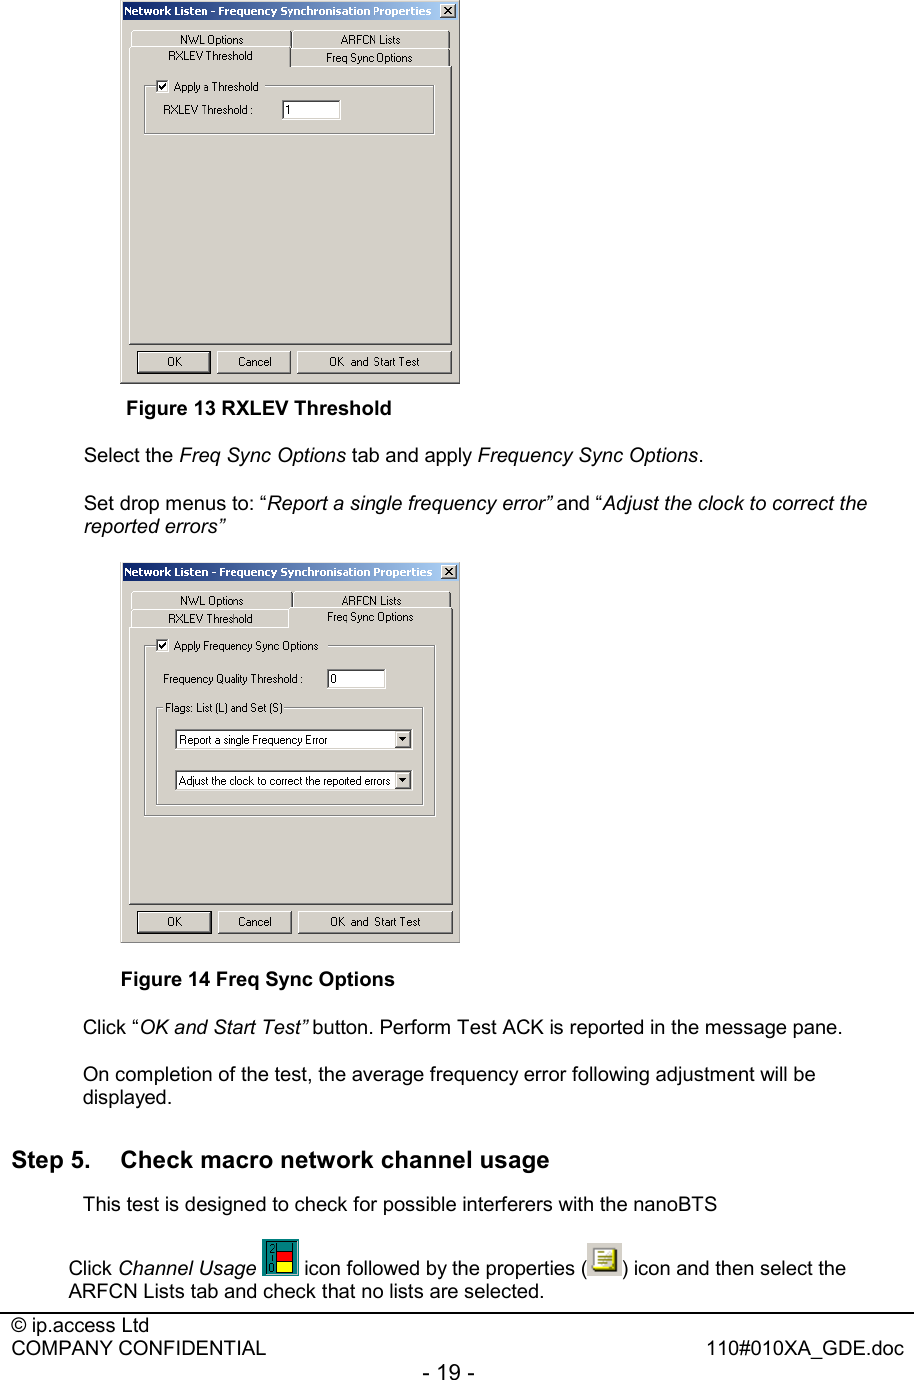  © ip.access Ltd   COMPANY CONFIDENTIAL  110#010XA_GDE.doc - 19 -    Figure 13 RXLEV Threshold Select the Freq Sync Options tab and apply Frequency Sync Options. Set drop menus to: “Report a single frequency error” and “Adjust the clock to correct the reported errors”  Figure 14 Freq Sync Options Click “OK and Start Test” button. Perform Test ACK is reported in the message pane. On completion of the test, the average frequency error following adjustment will be displayed.  Step 5.  Check macro network channel usage   This test is designed to check for possible interferers with the nanoBTS Click Channel Usage  icon followed by the properties ( ) icon and then select the ARFCN Lists tab and check that no lists are selected.  